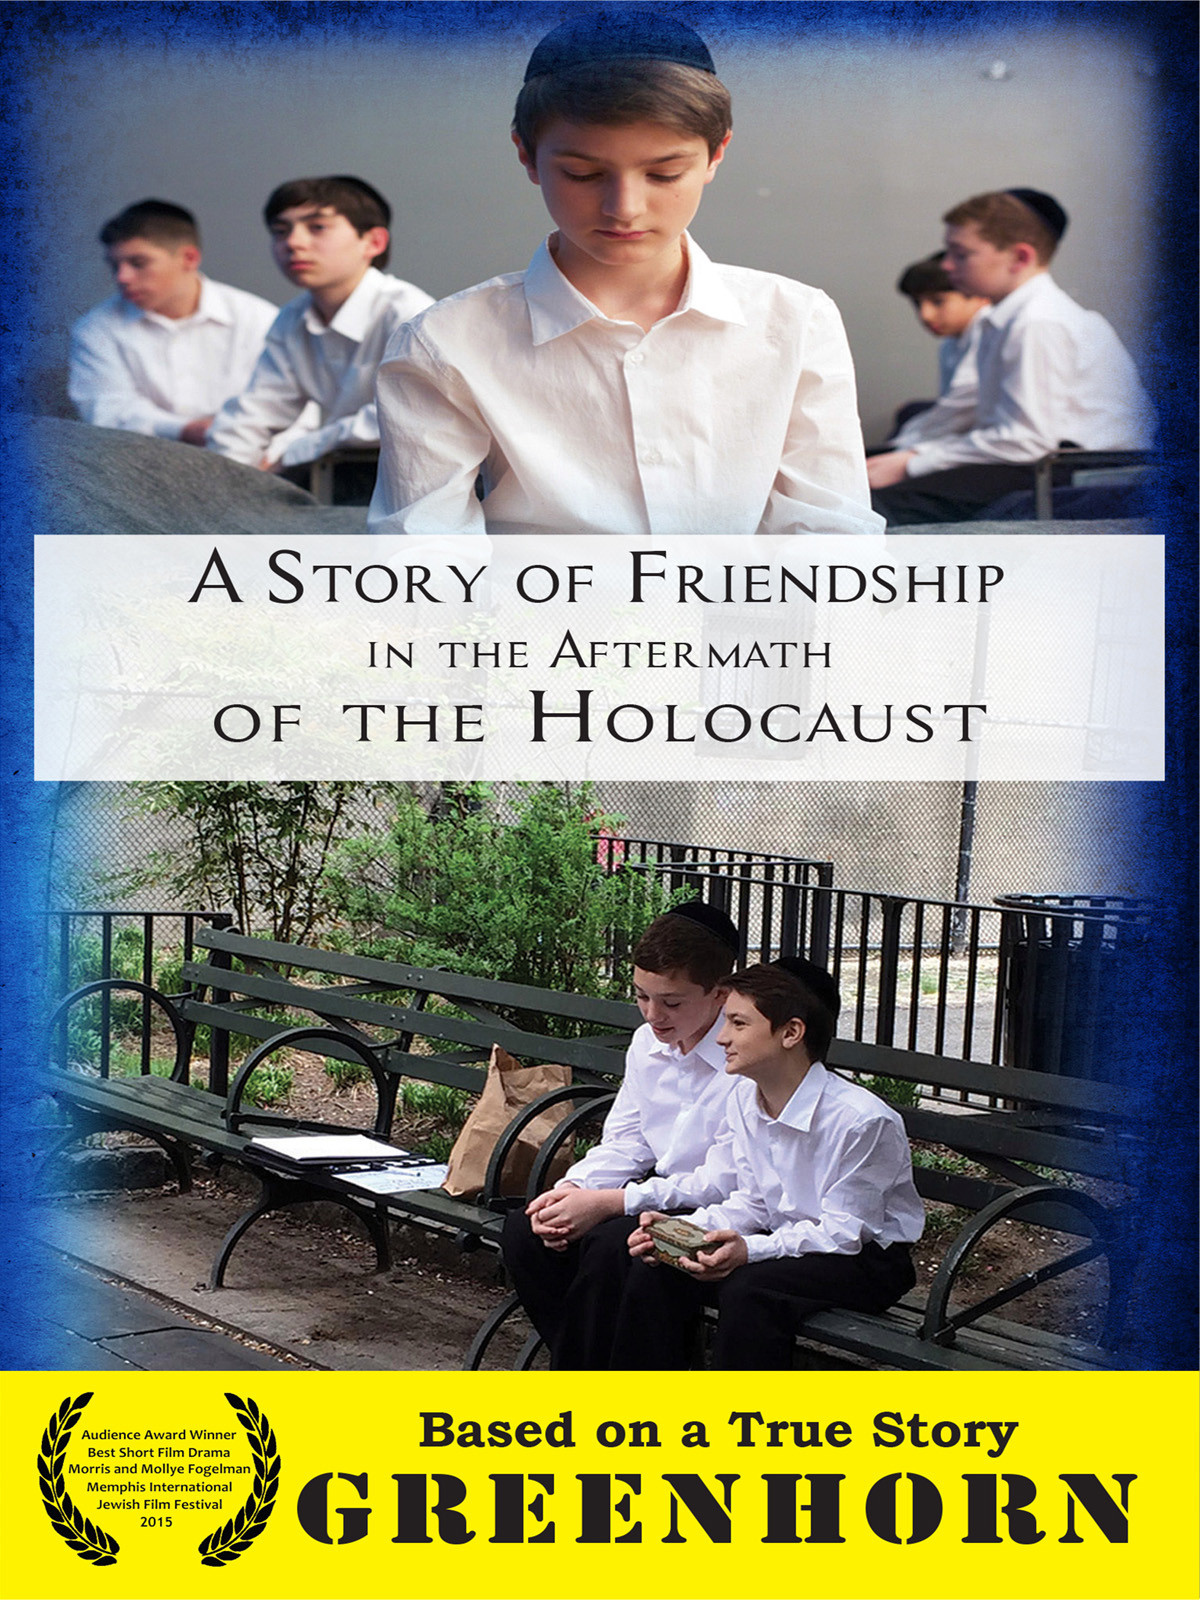 L4812 - Greenhorn  A Story of Friendship in the Aftermath of the Holocaust